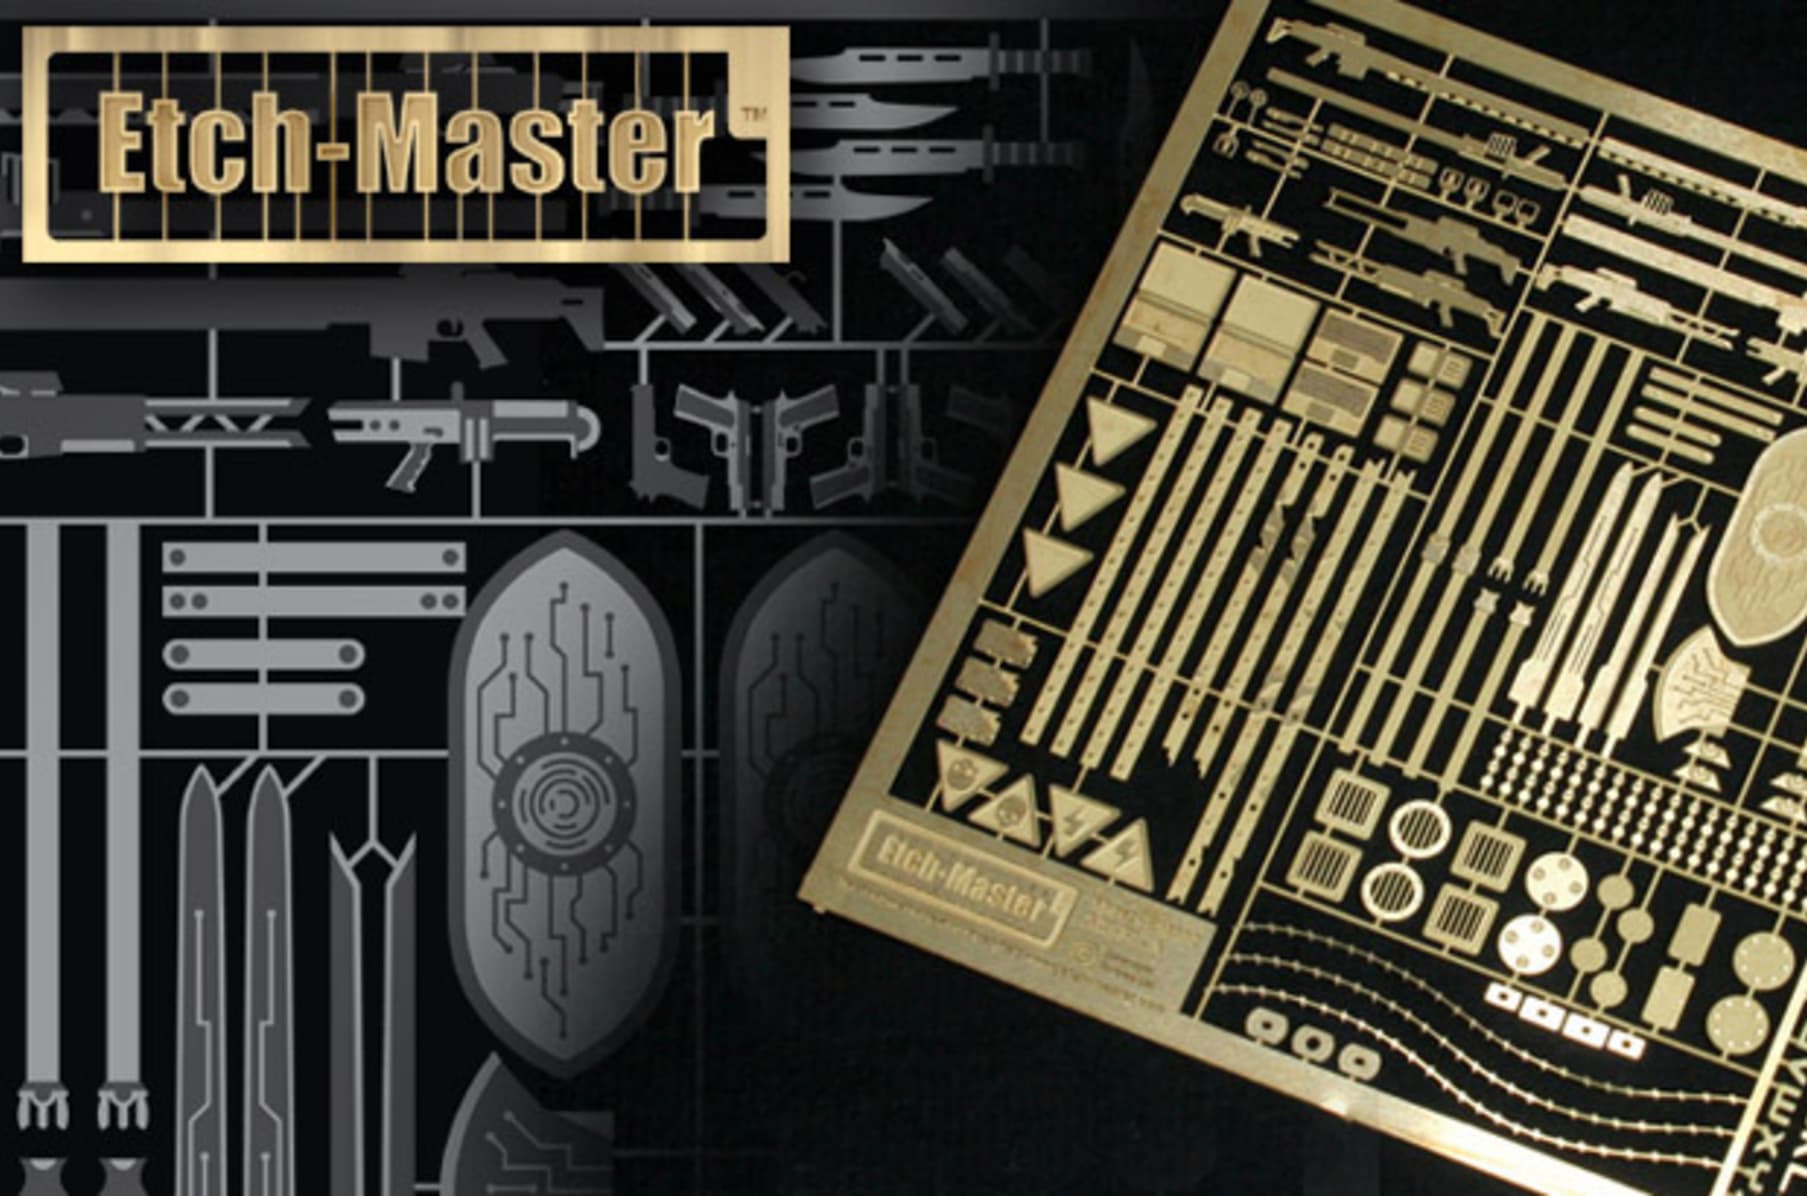 Etch-Master brass-etch details for miniatures and scenery